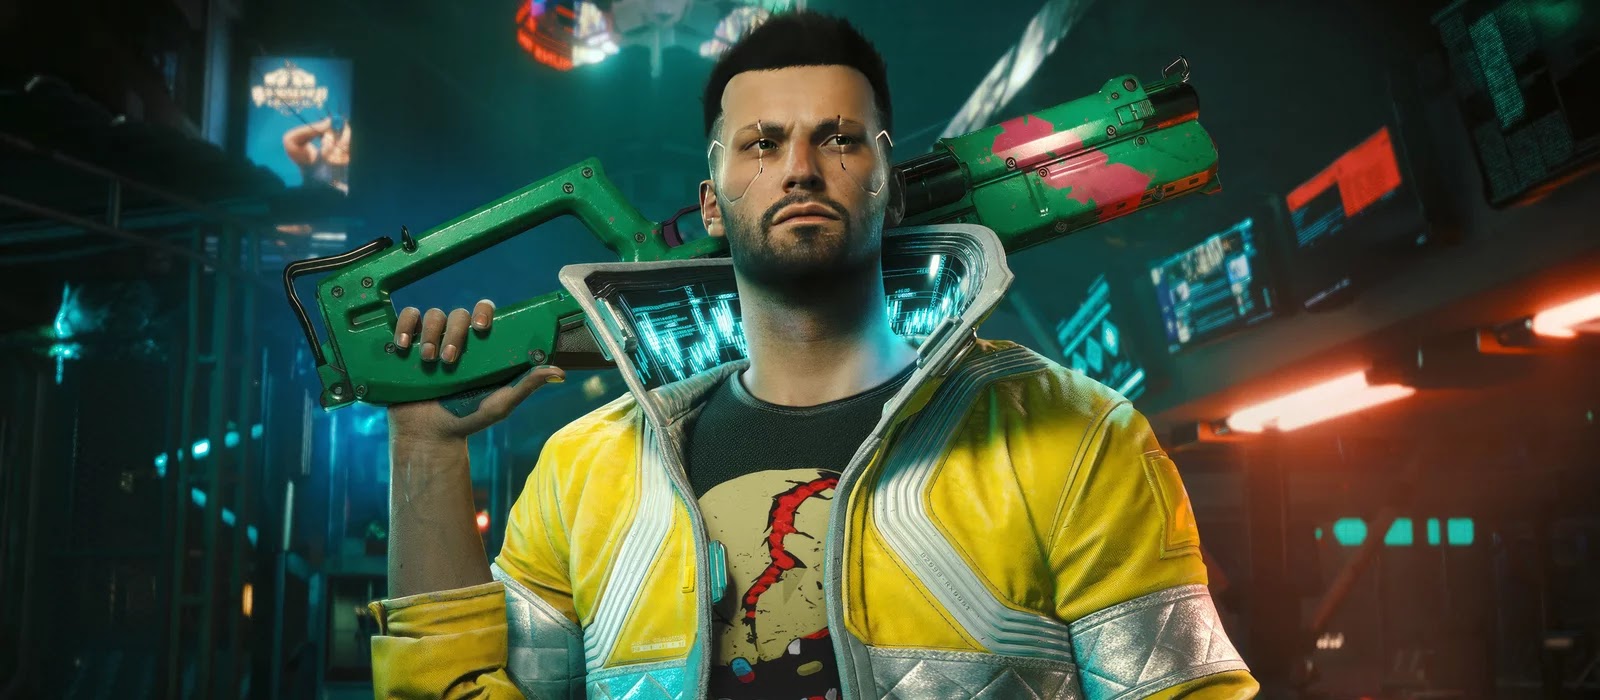 Where to find and buy Sandevistan in Cyberpunk 2077 - the best build for David Martinez